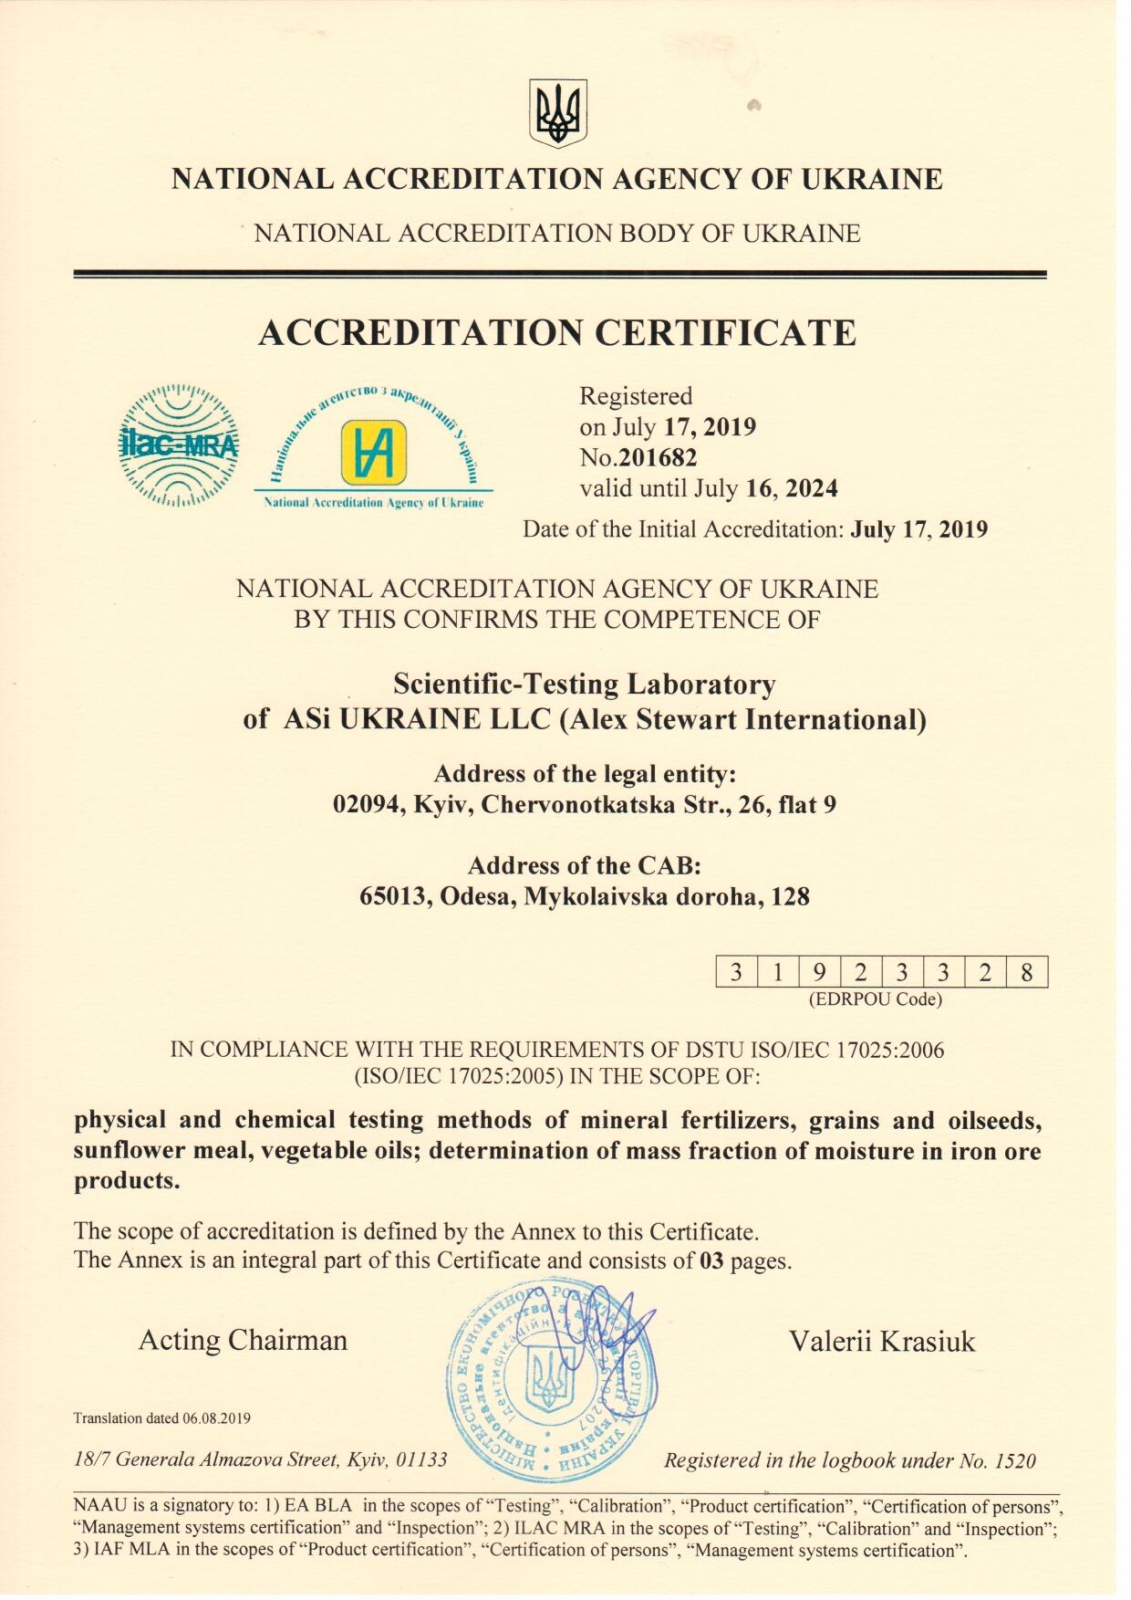 NAAU Accreditation Certificate of compliance with requirements of DSTU ISO/IEC 17025